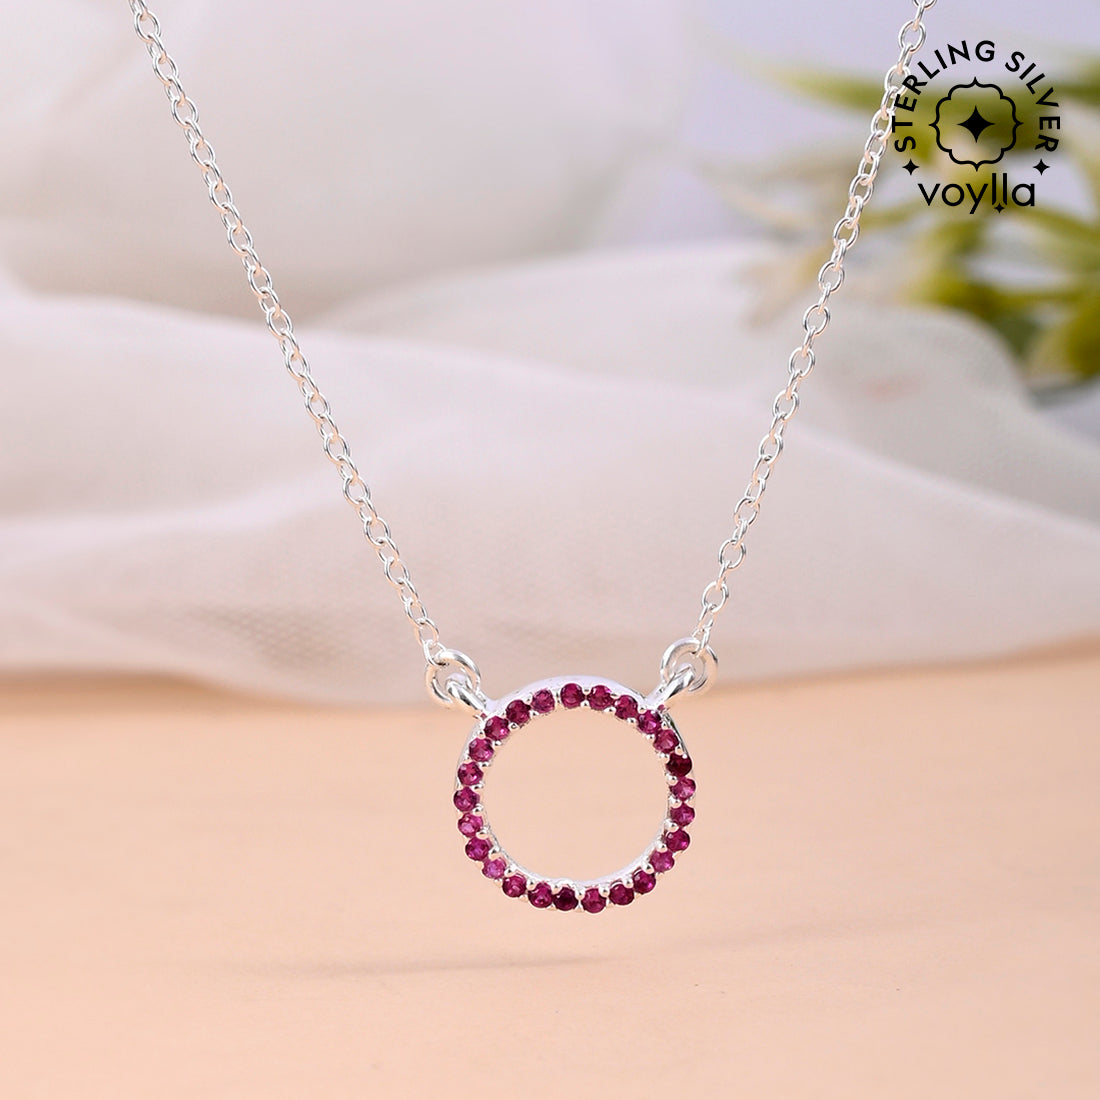 Attractive 925 Sterling Silver Modern Necklace